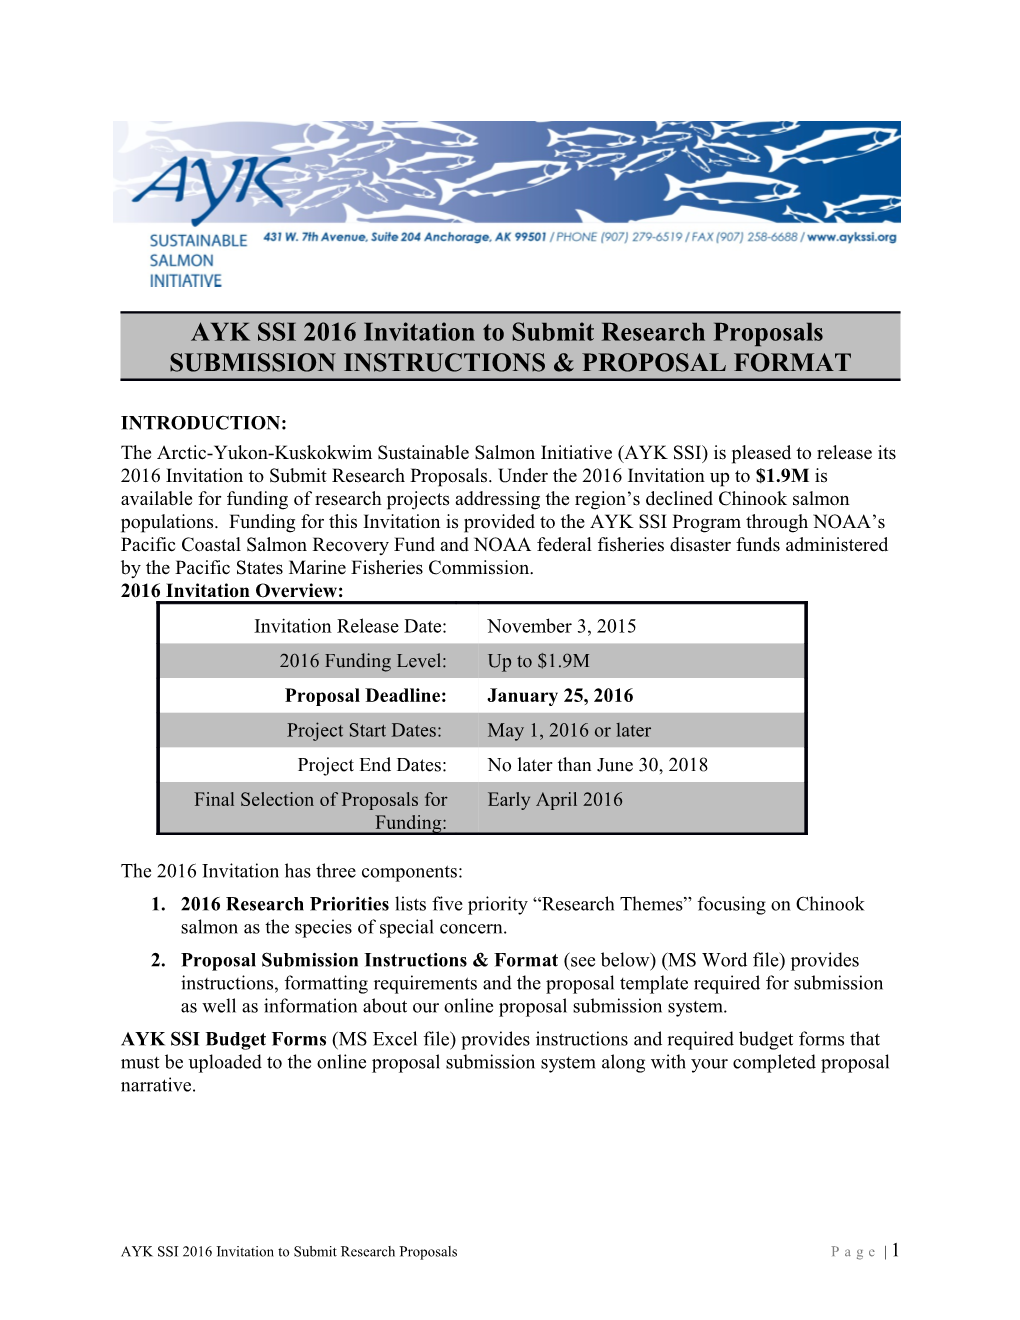 AYK SSI 2016 Invitation to Submit Research Proposals